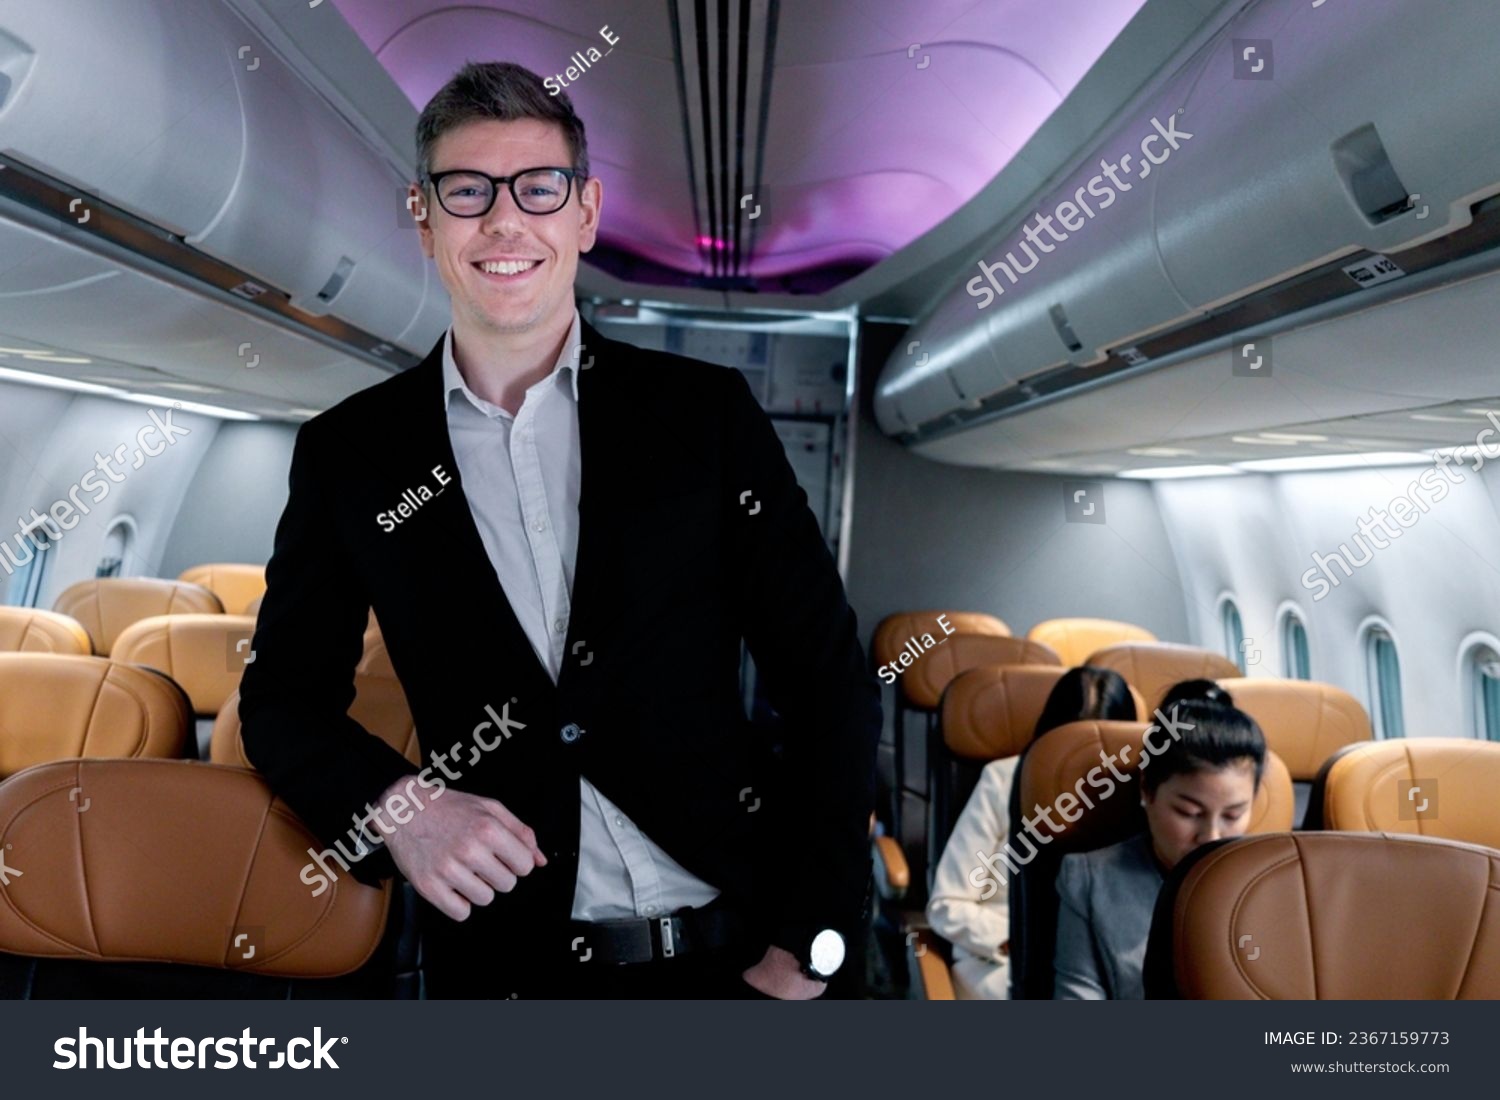 Portrait of happy smiling businessman in black suit, standing on aisle inside airplane, male passenger traveling on business trip by aircraft, businesspeople traveling with airline transportation. #2367159773